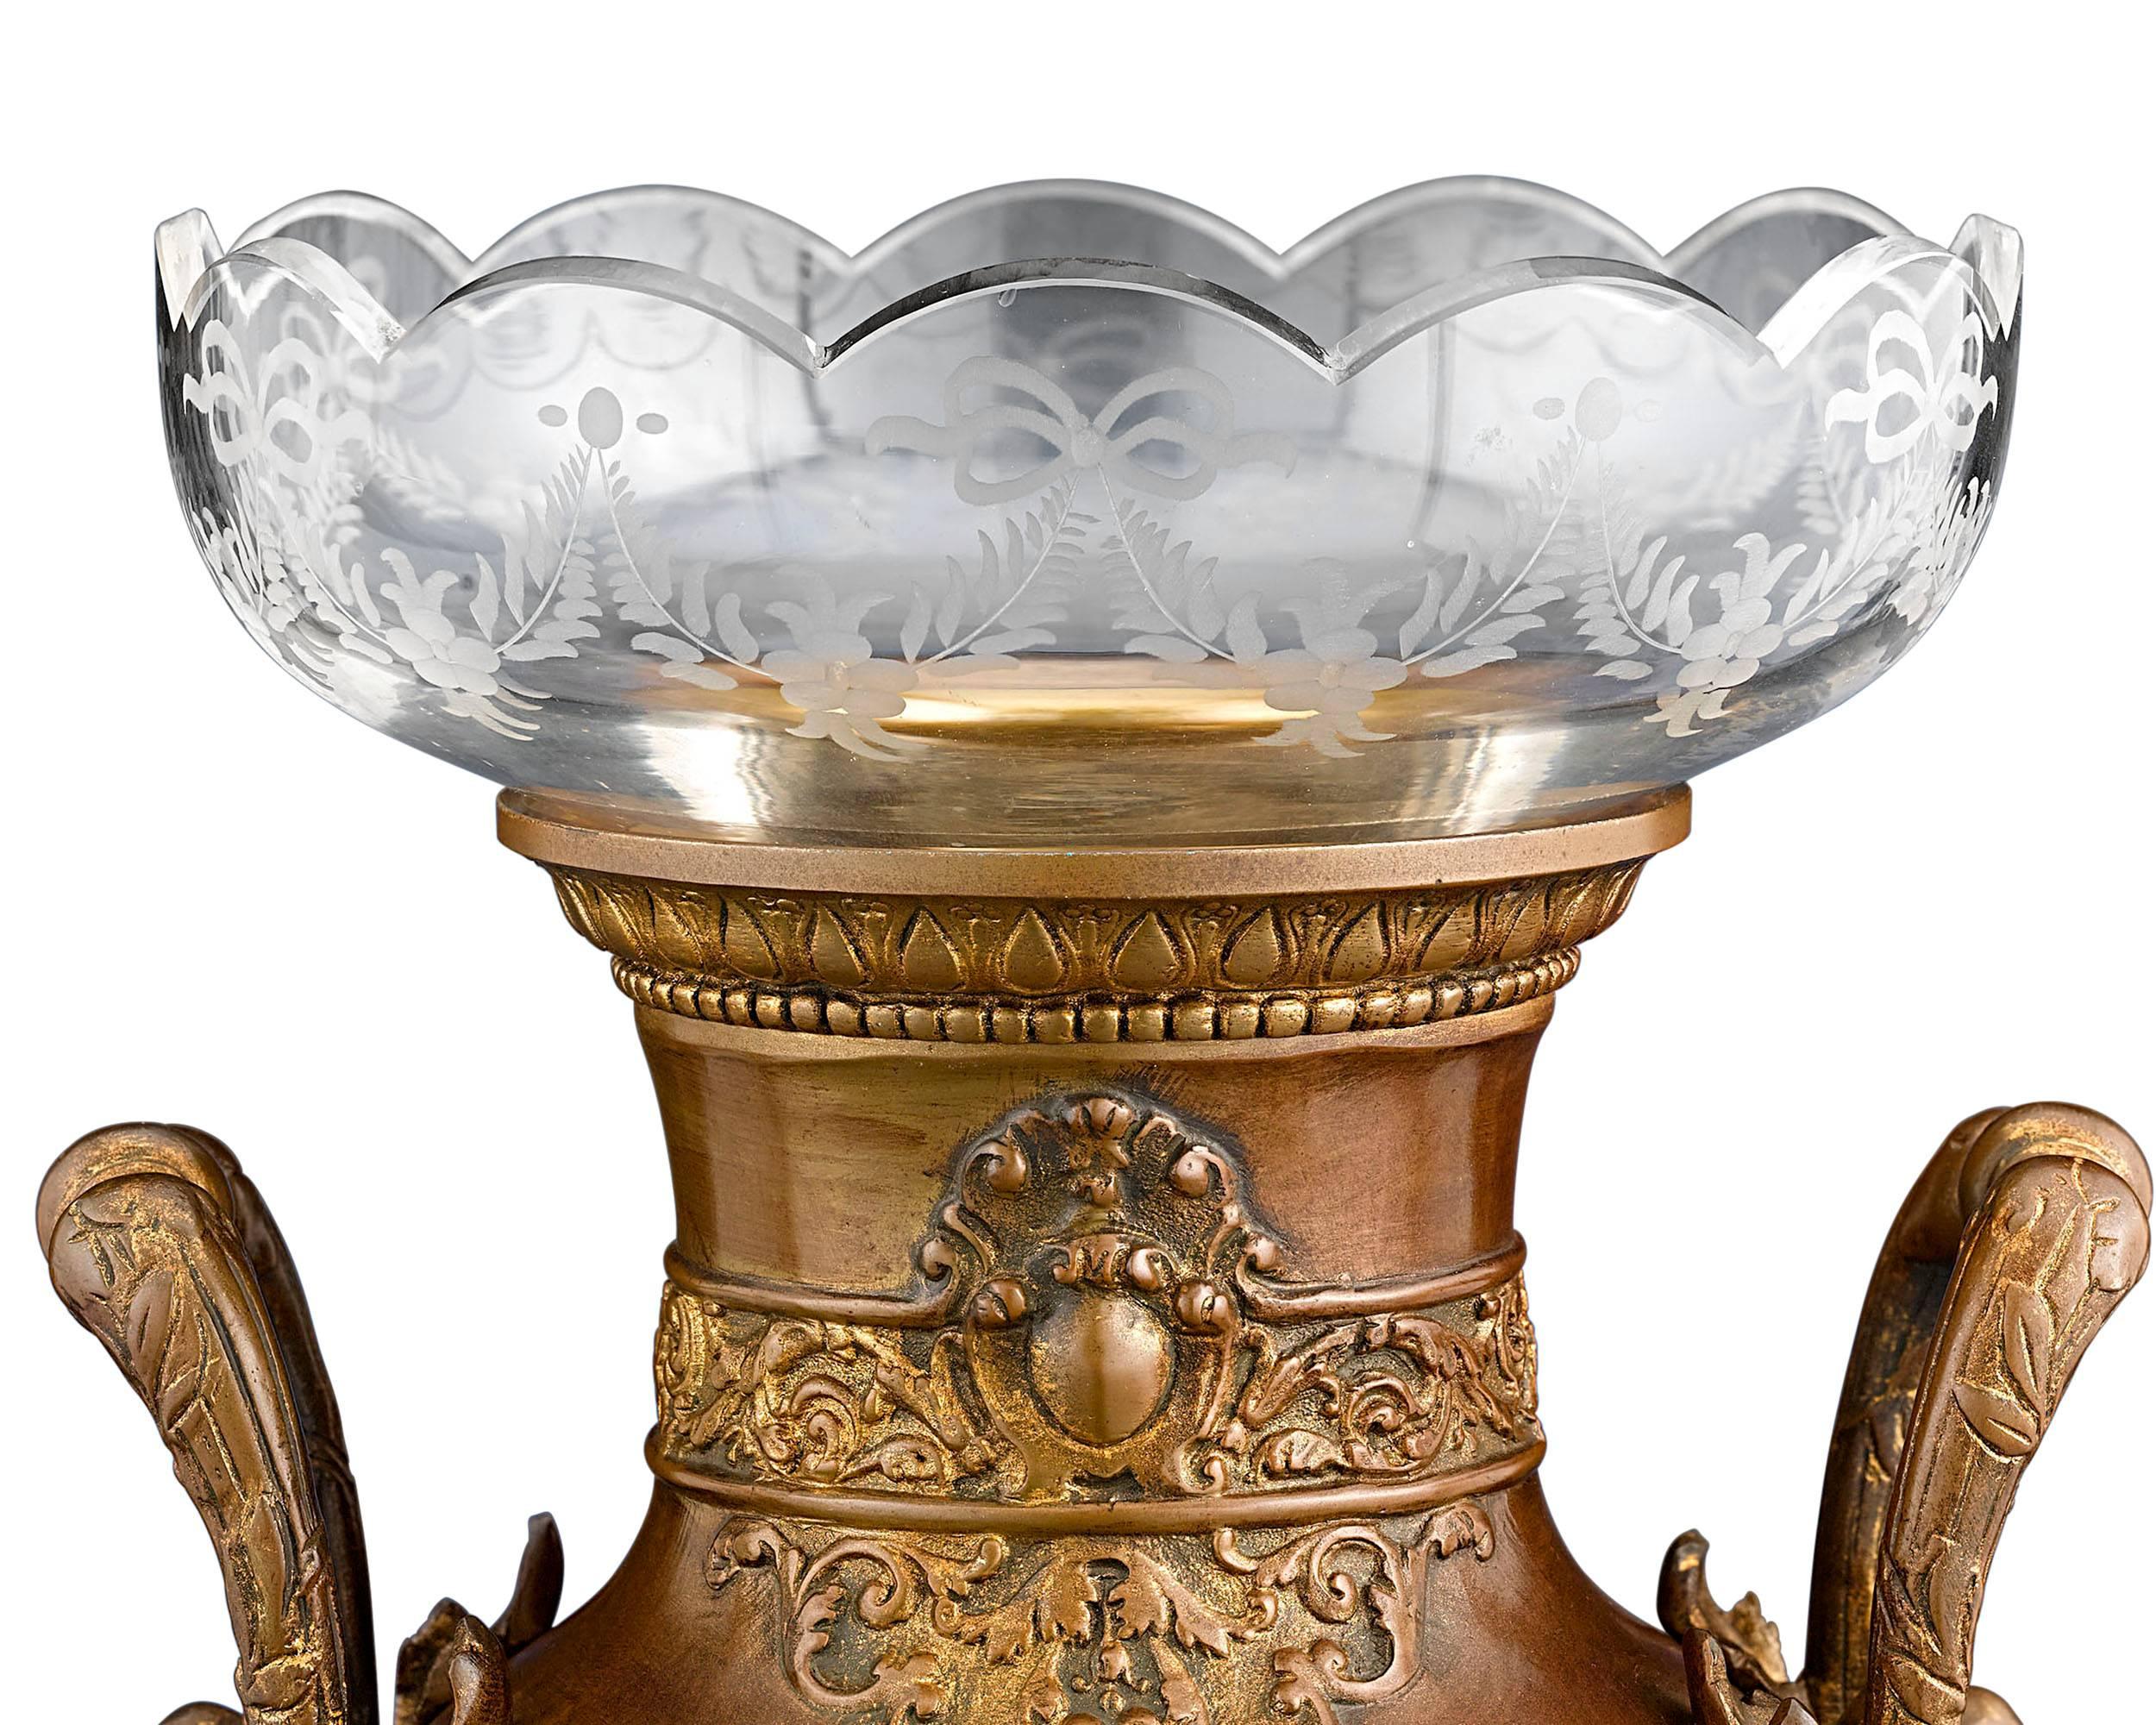 A striking mythological motif distinguishes this outstanding pair of French Neoclassical gilt bronze urns. Modeled after a design by French architect Léon Boucher, these magnificent, baluster-form vases display exceptional images of Greek heroes